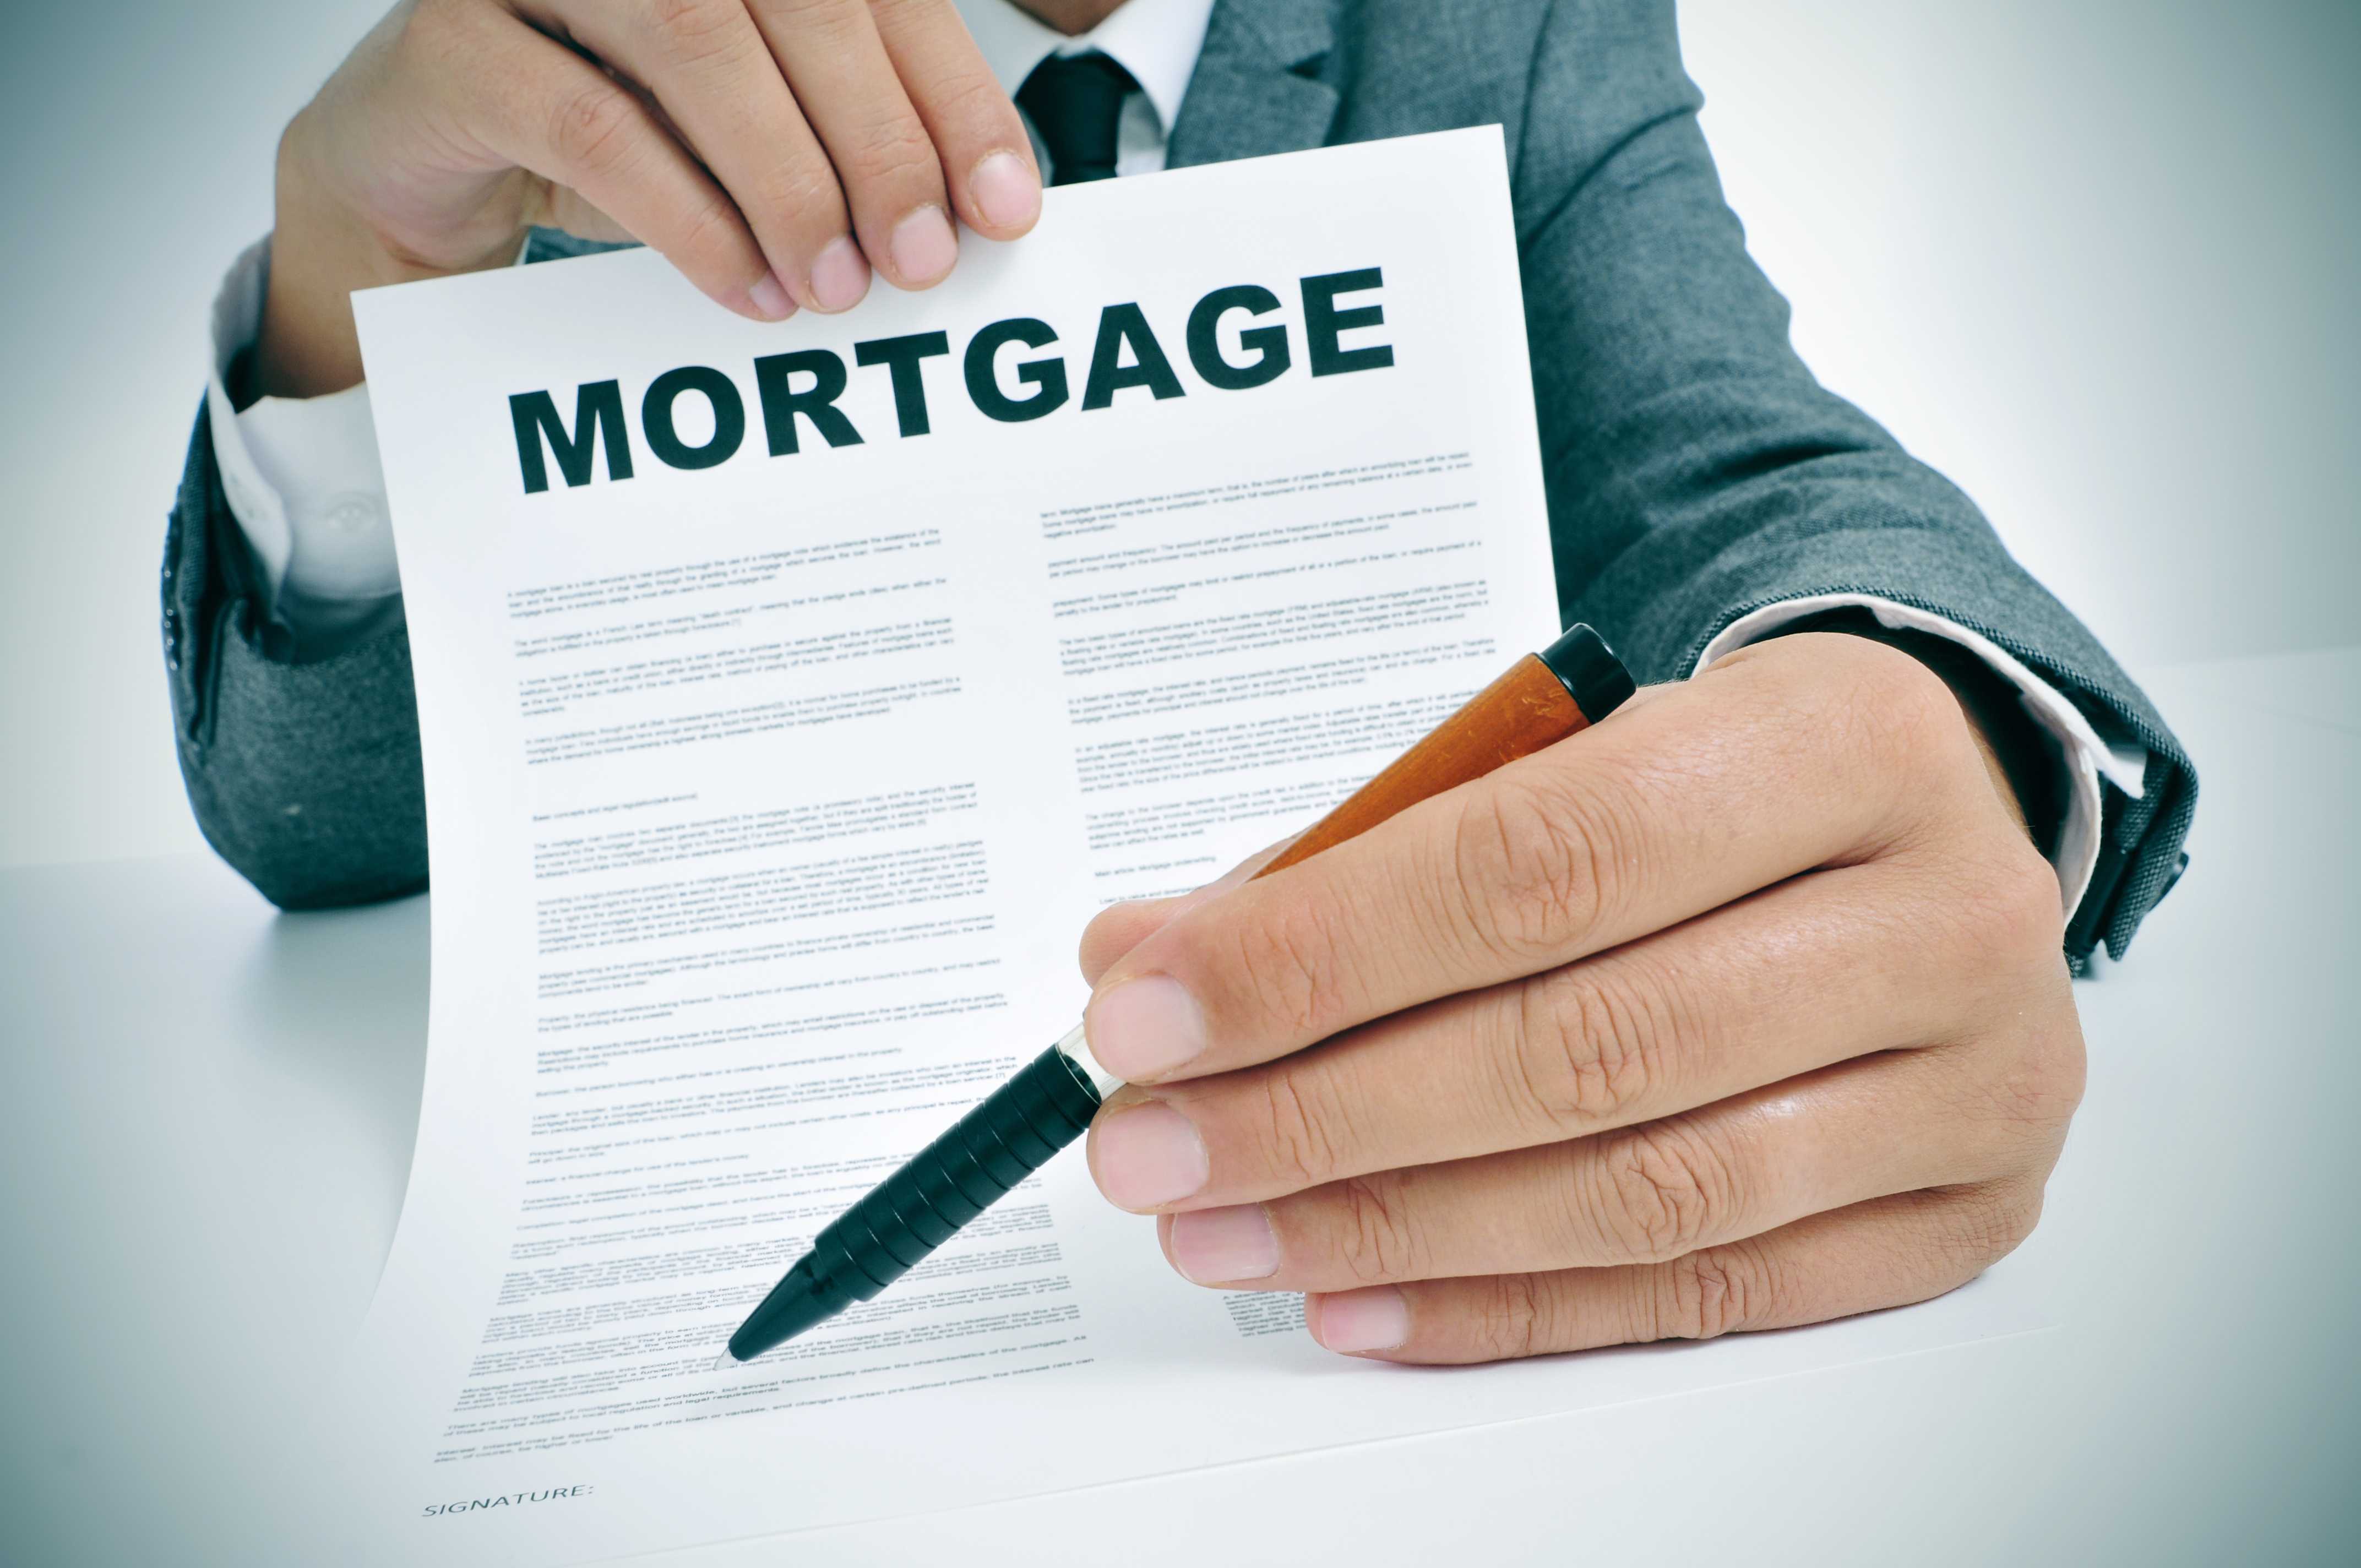 The Effect of Technology on the Mortgage Industry